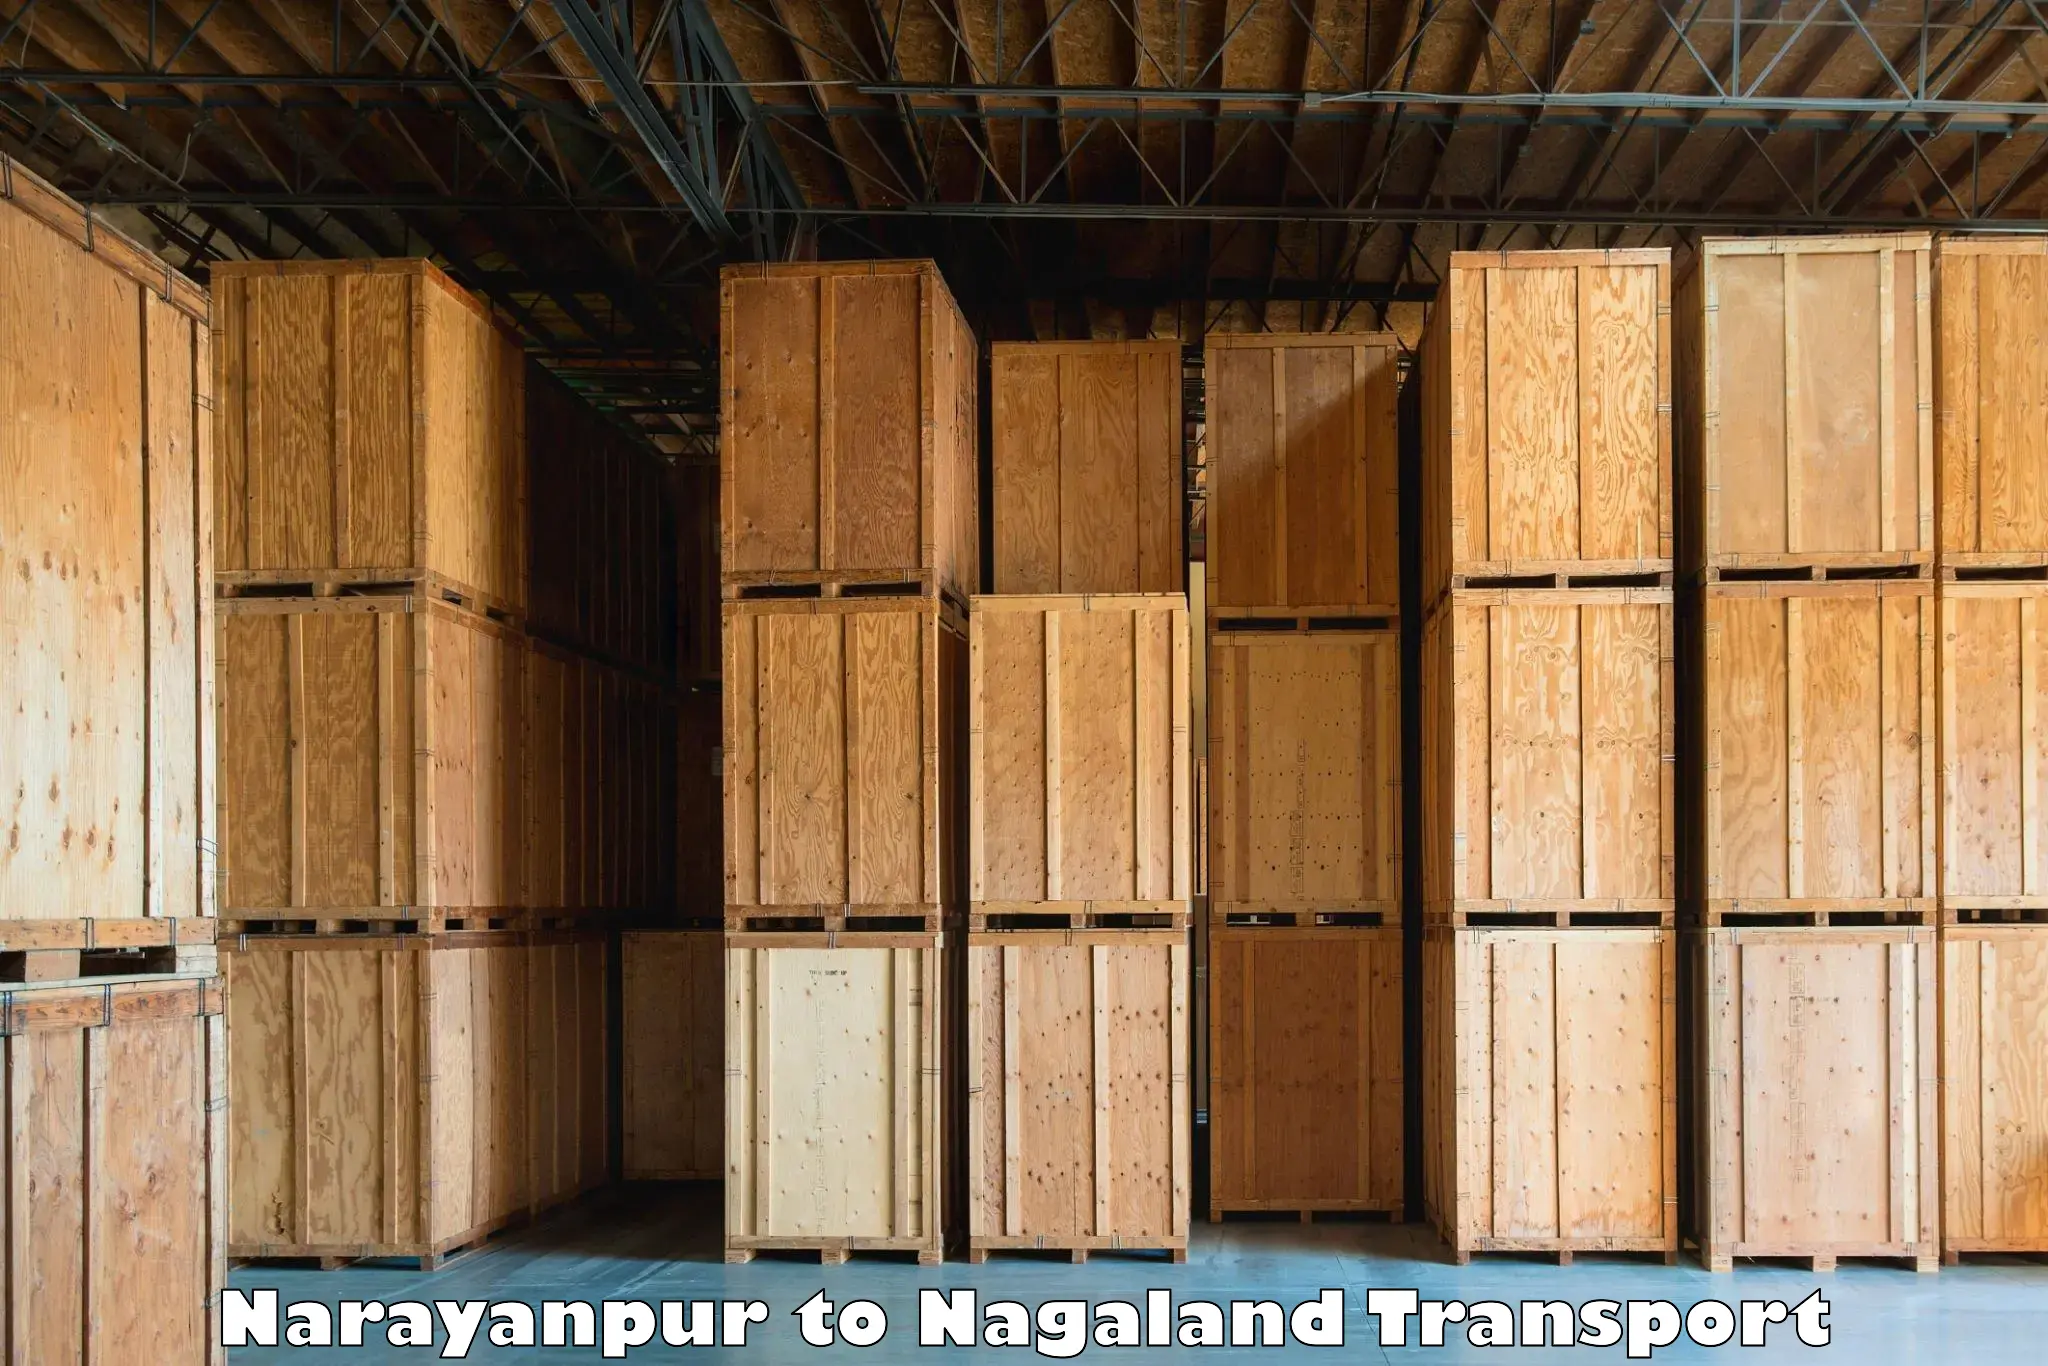 Online transport service Narayanpur to Dimapur